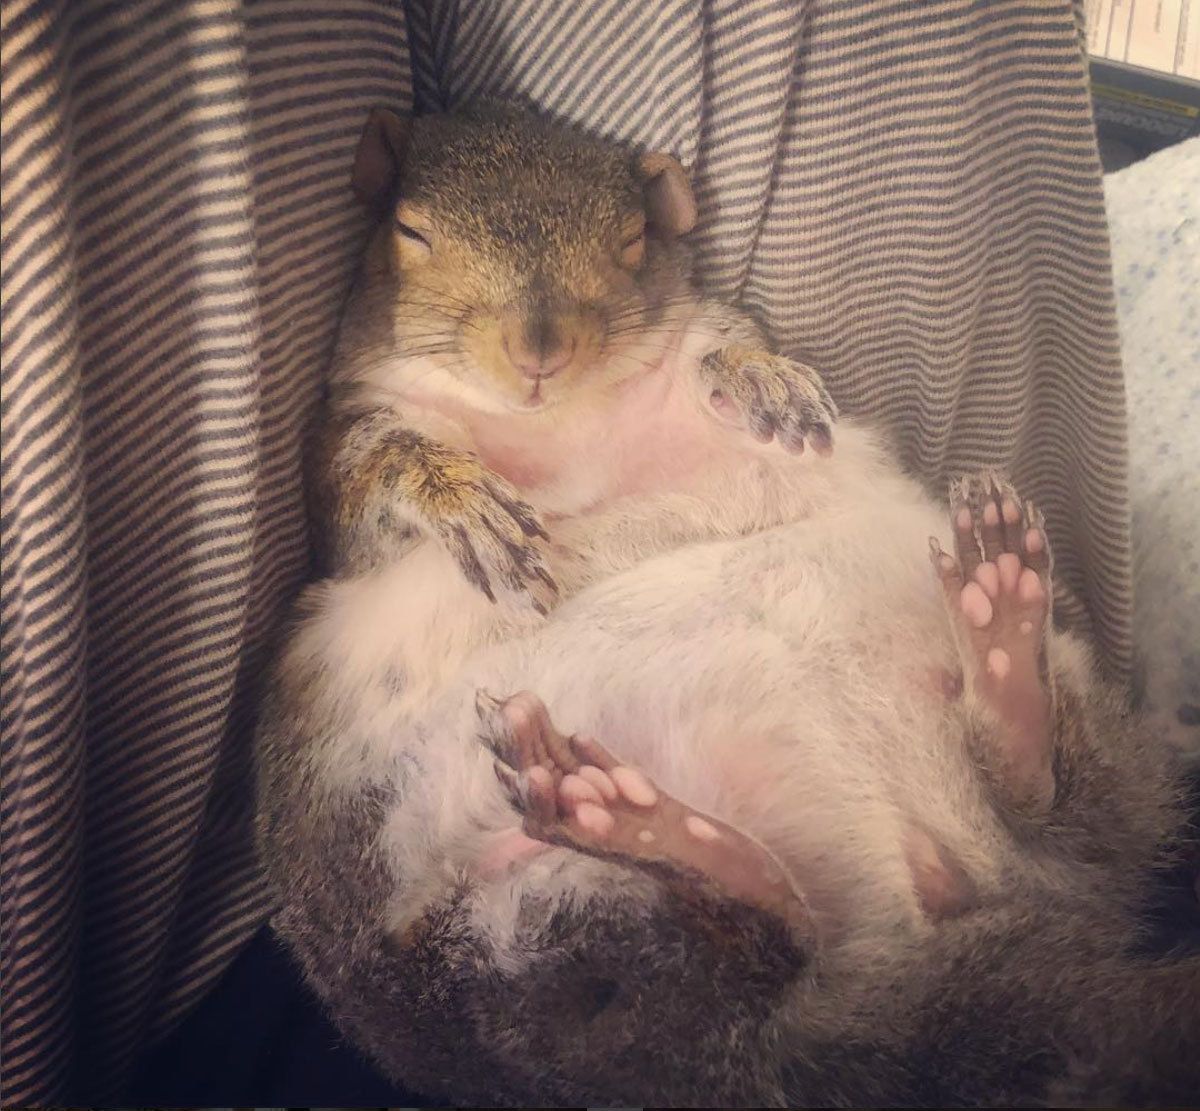 How a pair of wildlife rescuers ended up with a chubby pet squirrel named Thumbelina